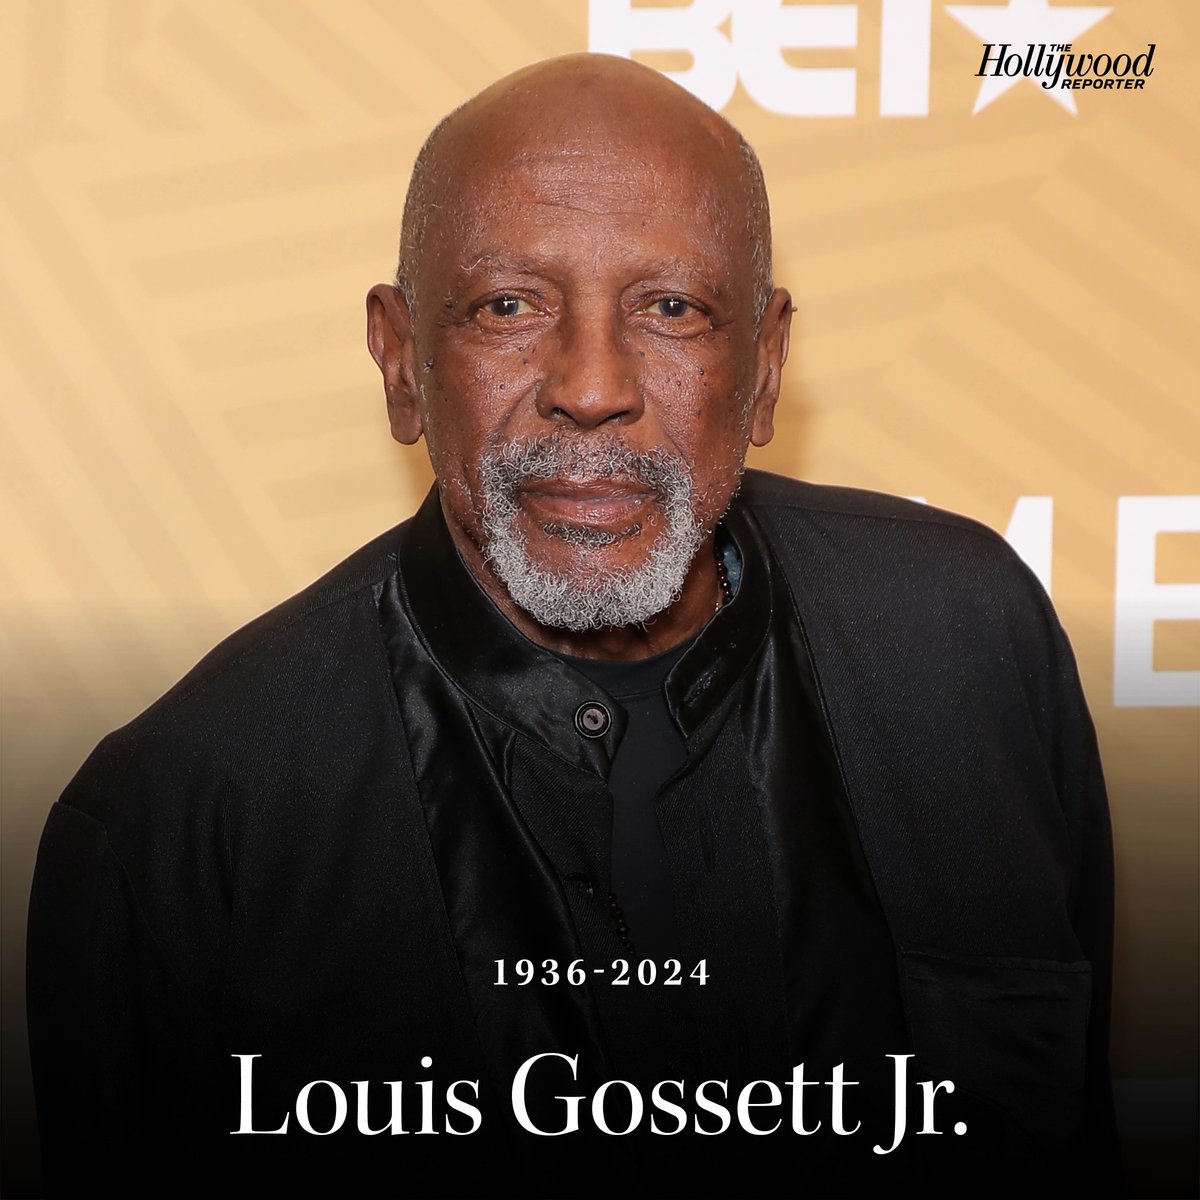 Louis Gossett Jr., who won an Oscar for his portrayal of a steely sergeant in 'An Officer and a Gentleman' and an Emmy for his performance as a compassionate slave in the landmark miniseries 'Roots,' has died at 87 thr.cm/P6iMXpM